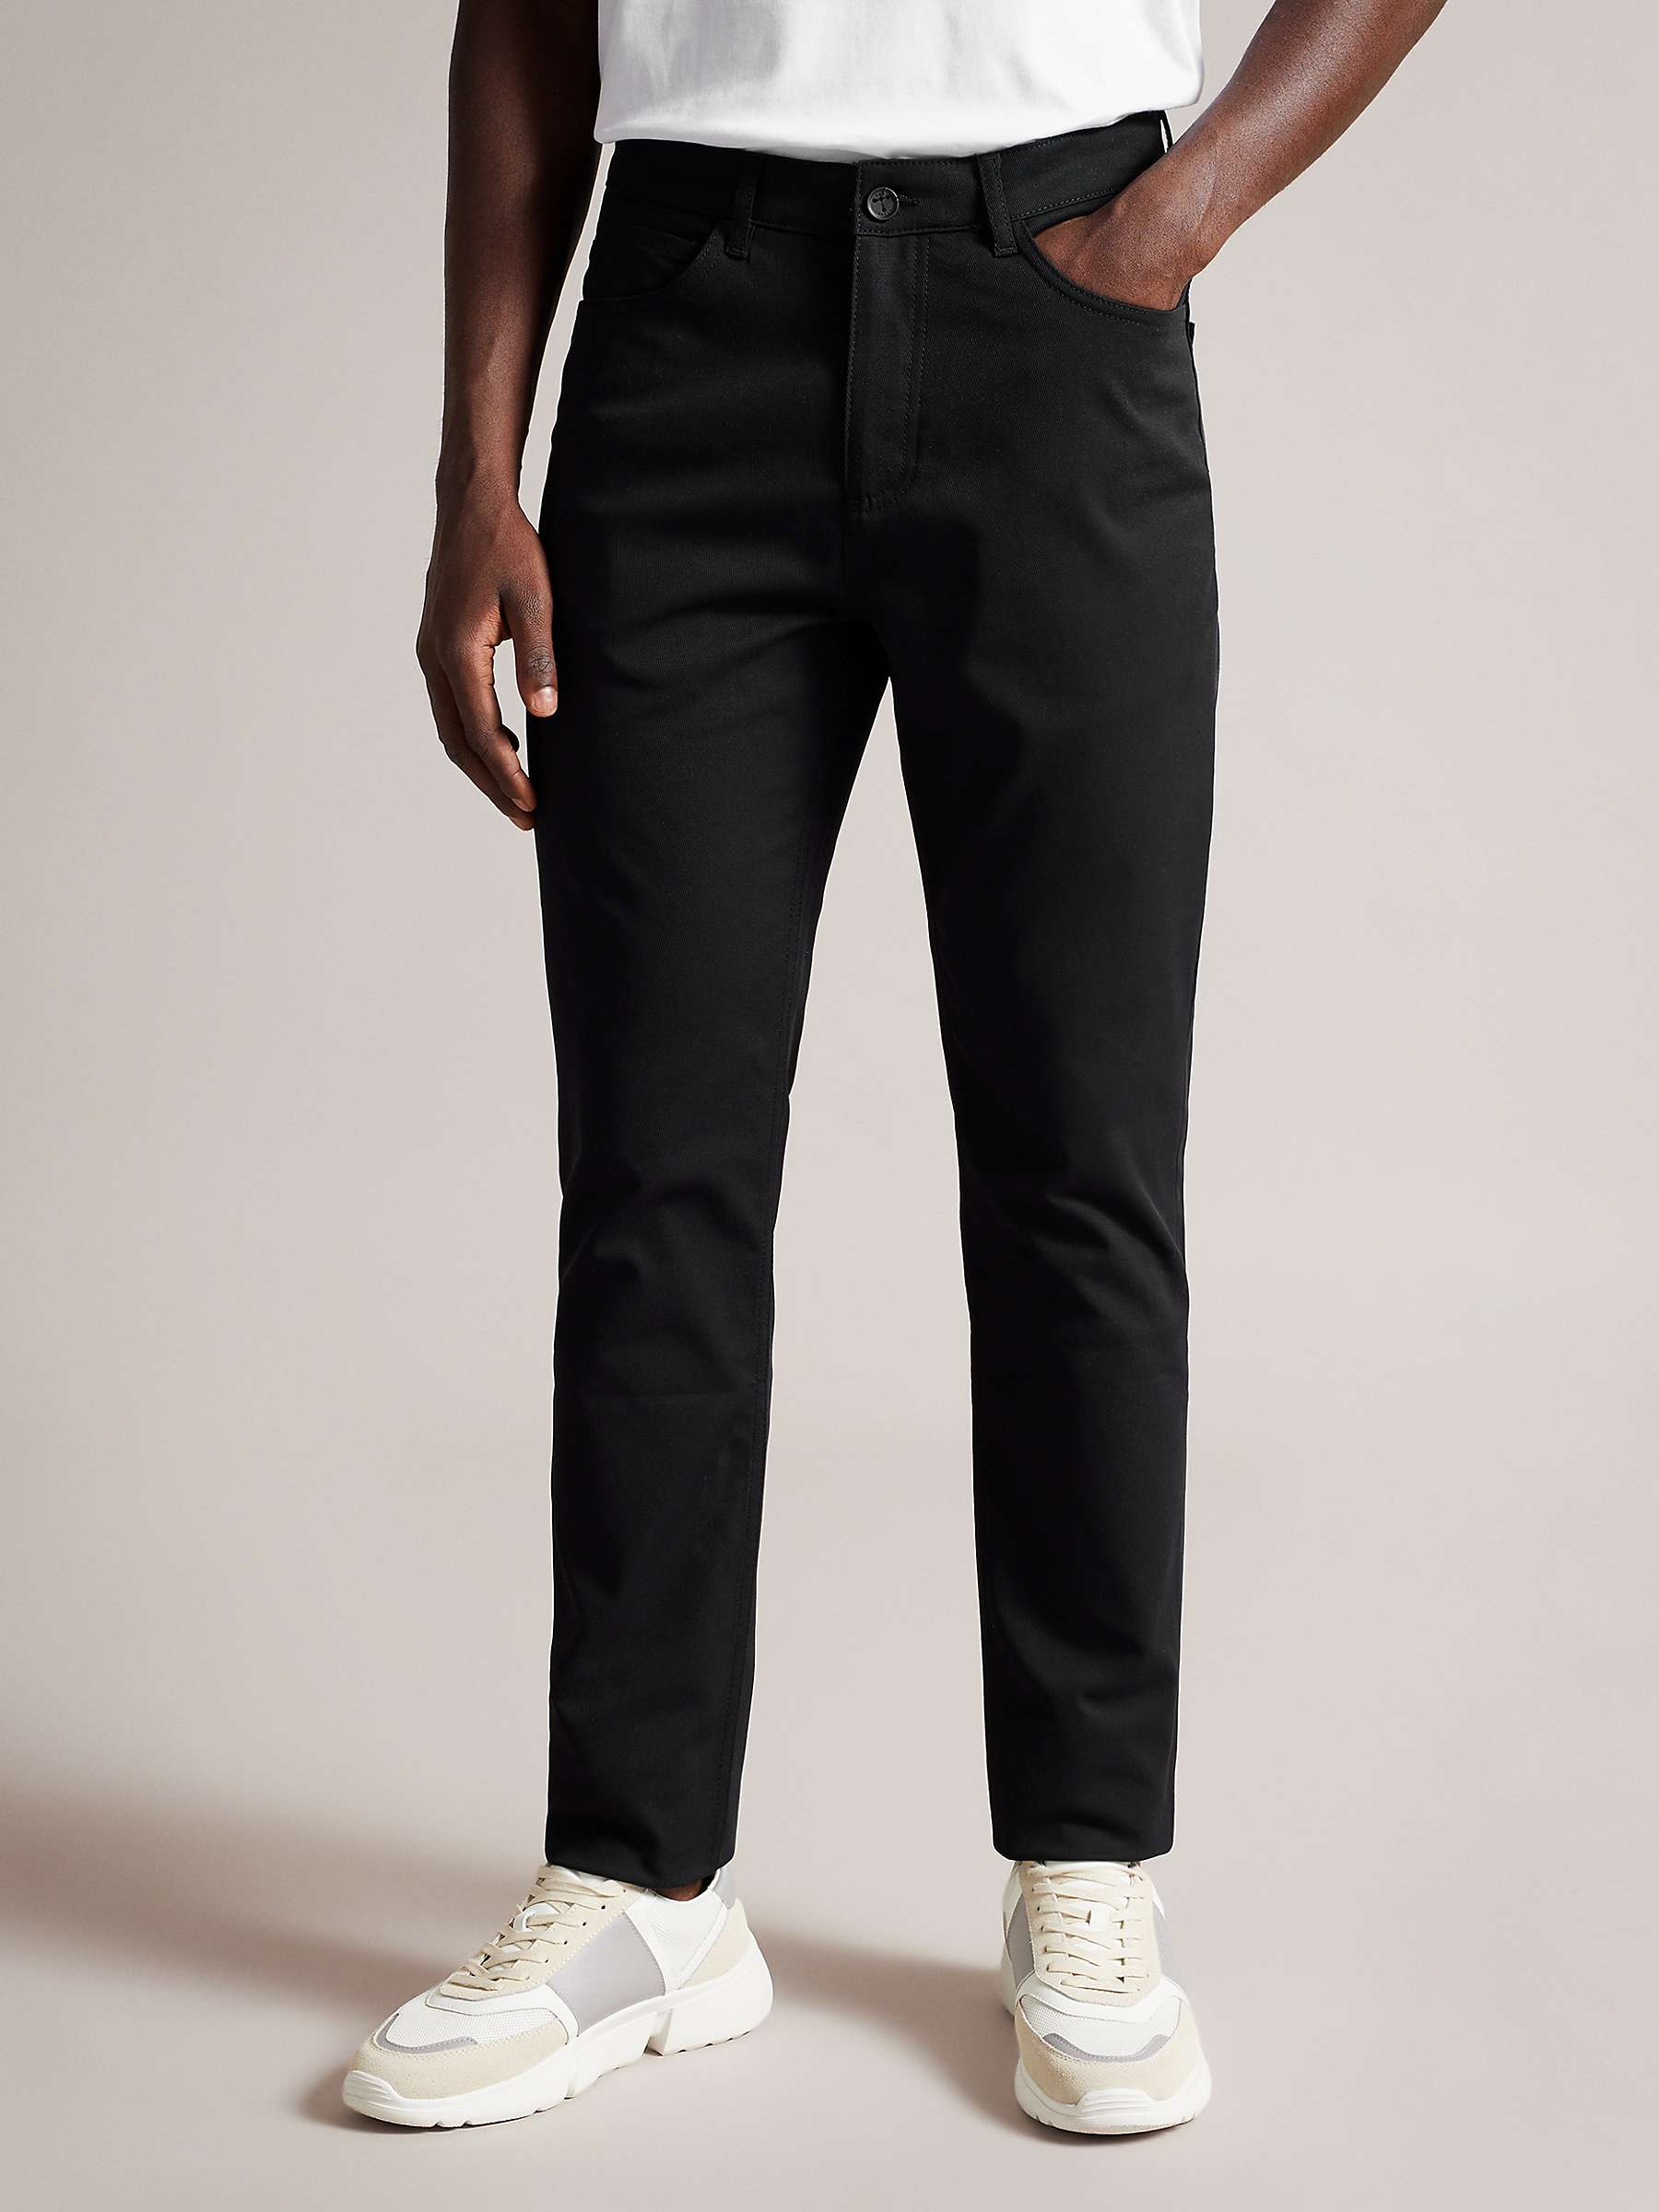 Ted Baker Mansurt Twill Trousers, Black at John Lewis & Partners